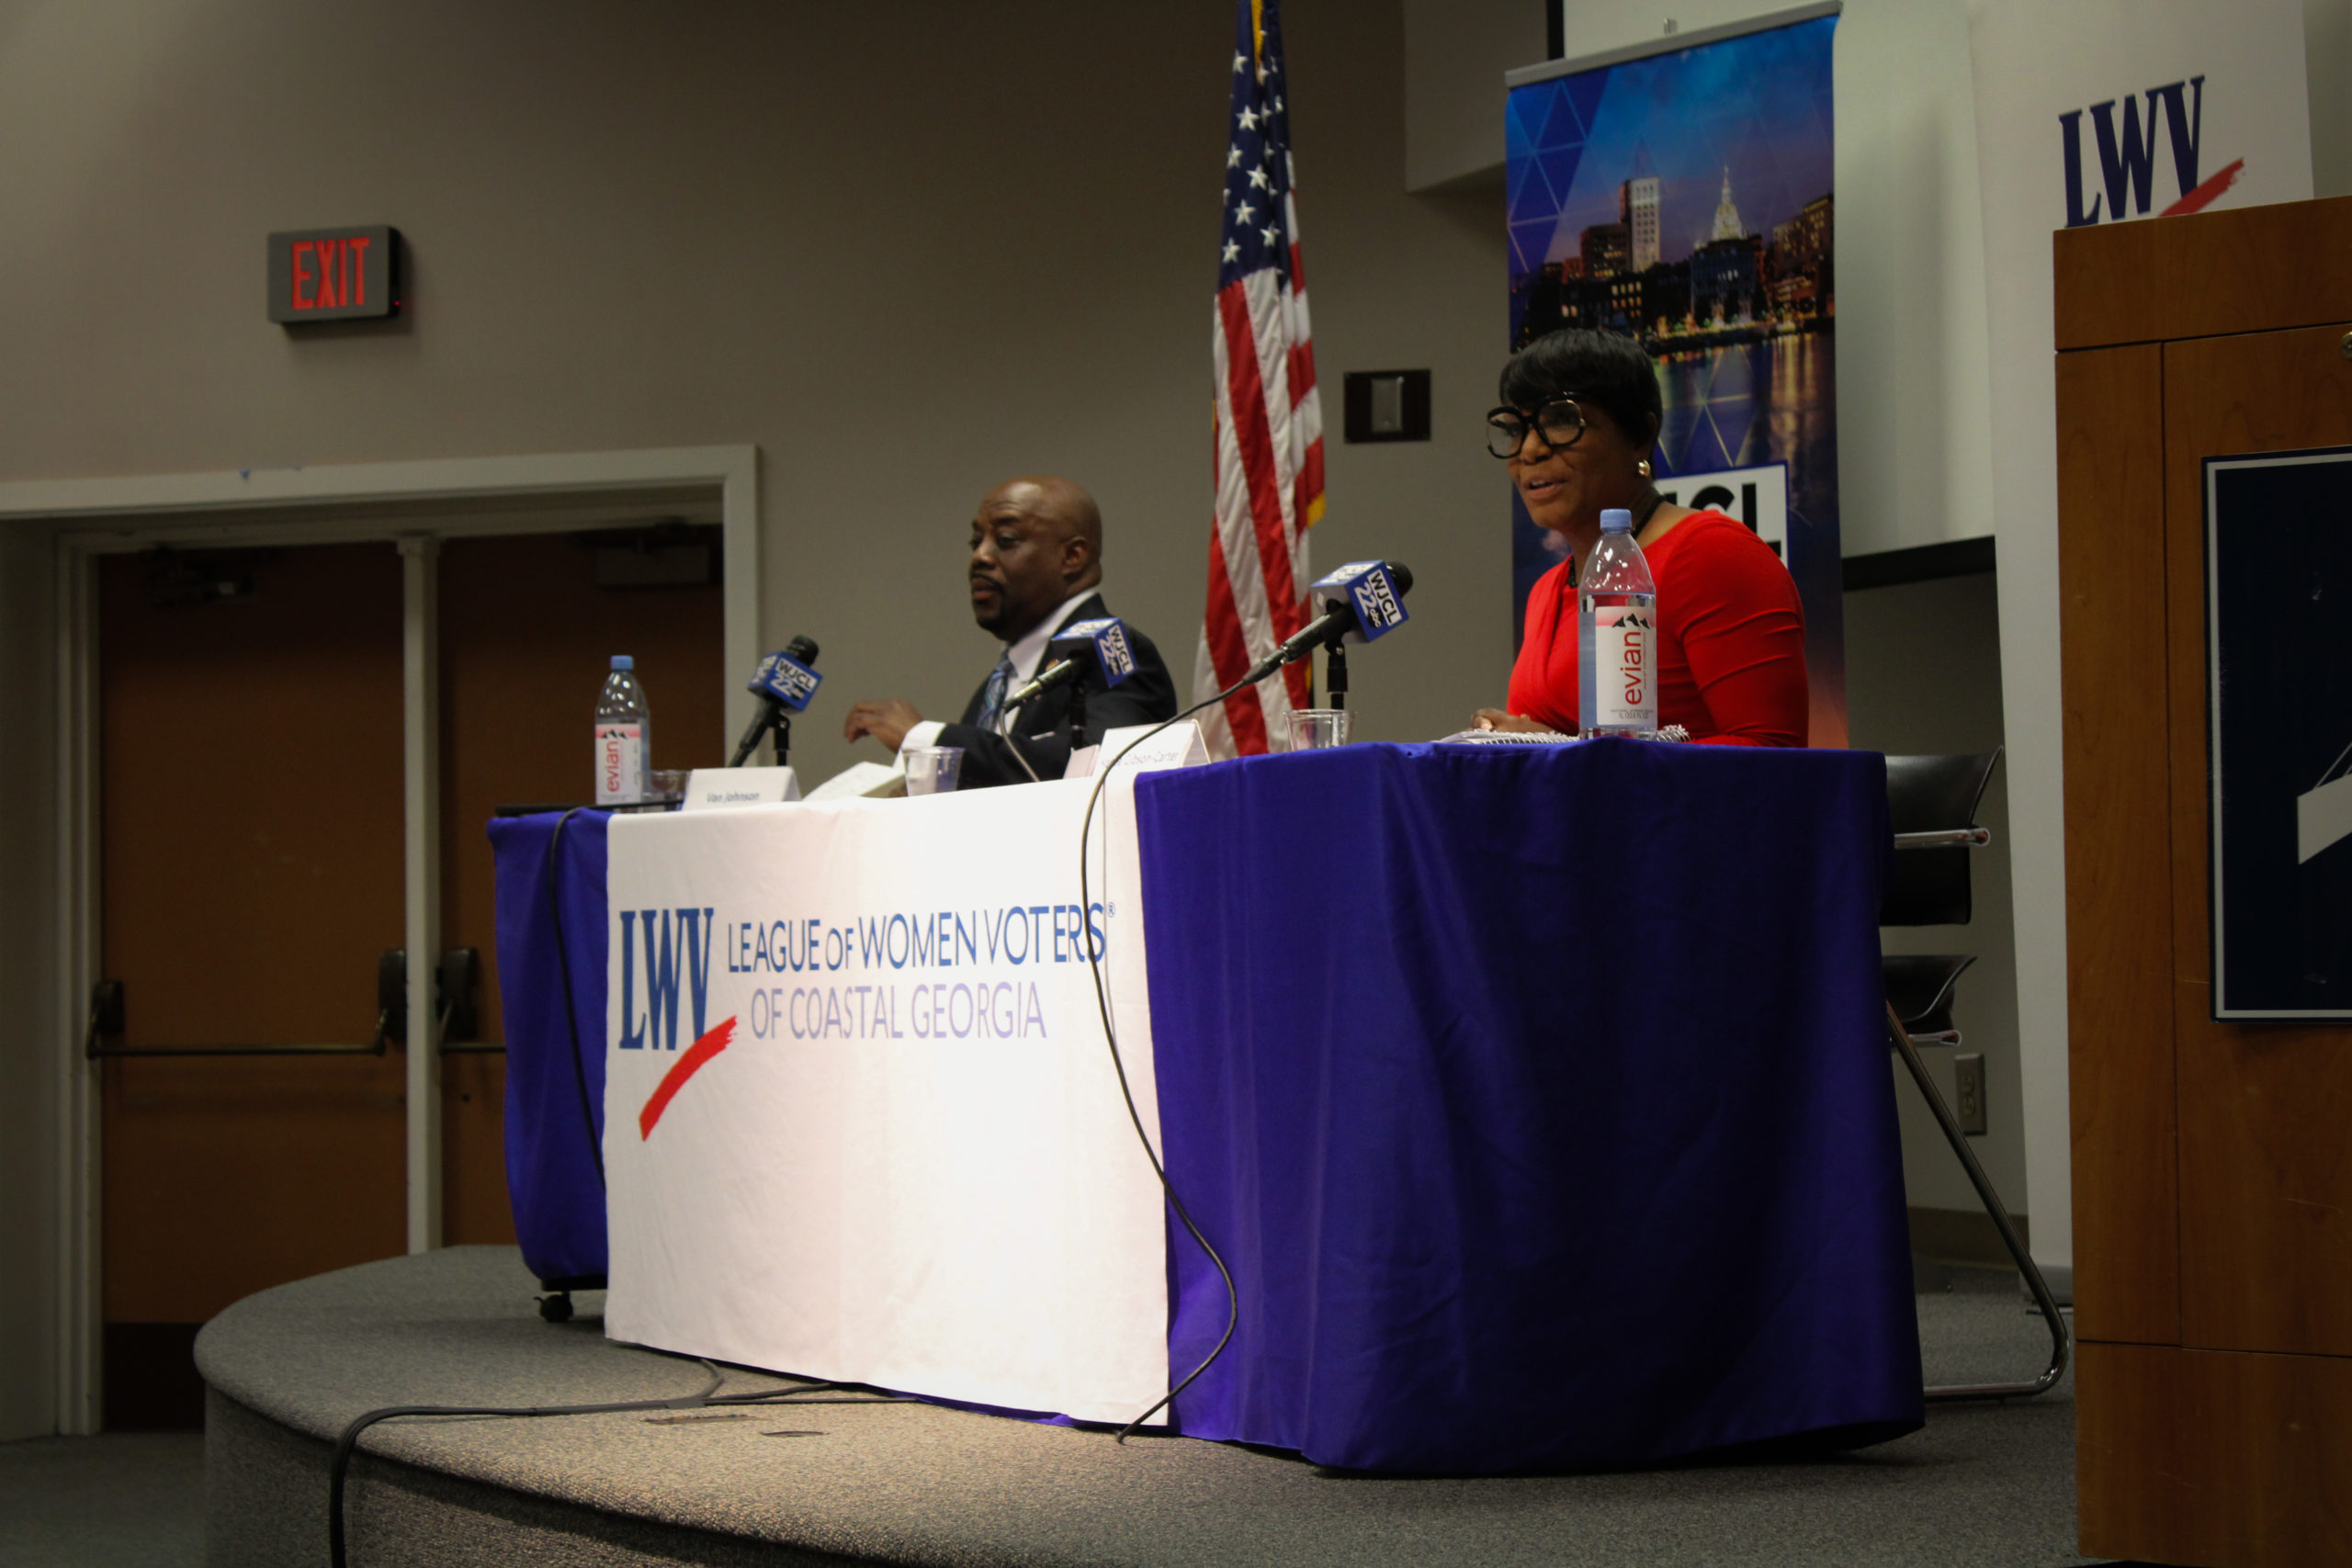 Mayor Van R. Johnson and candidate Kesha Gibson-carter faced off at a mayoral forum hosted by The League of Women Voters of Coastal Georgia